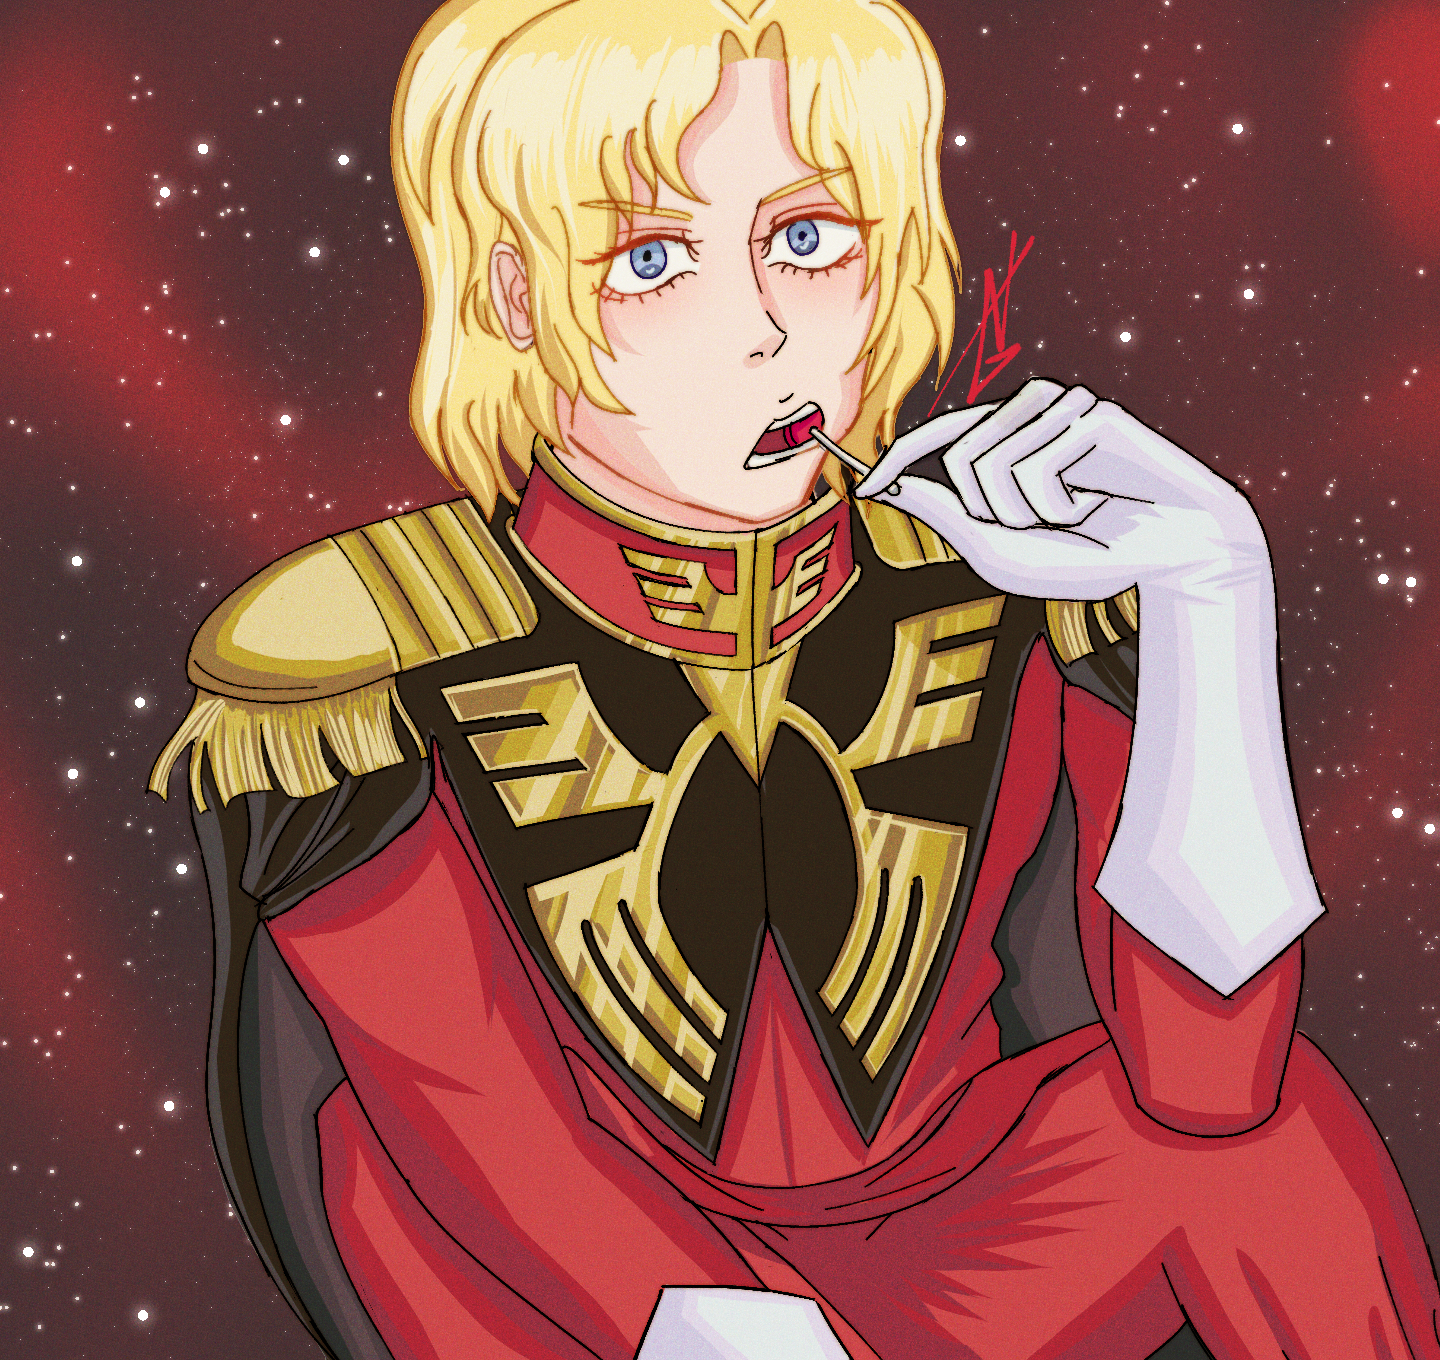 Fanart of Char Aznable from Mobile Suit Gundam.